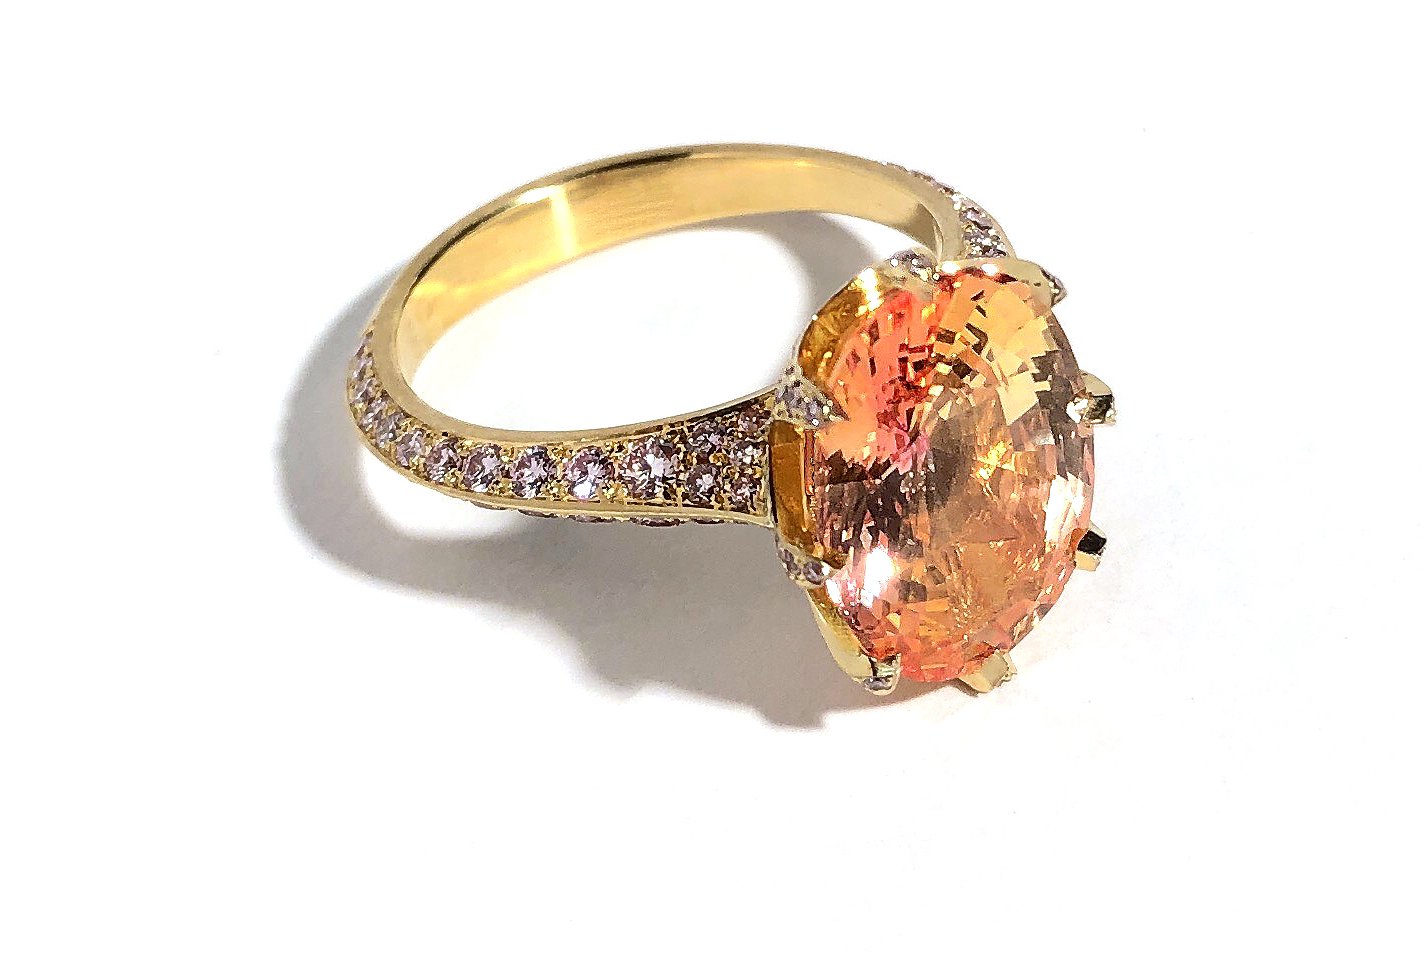 Padparadscha Ring by Geoffrey Good - 7.31 ct. padaparadscha with diamond melee, set in 18K yellow gold and 20K pink gold